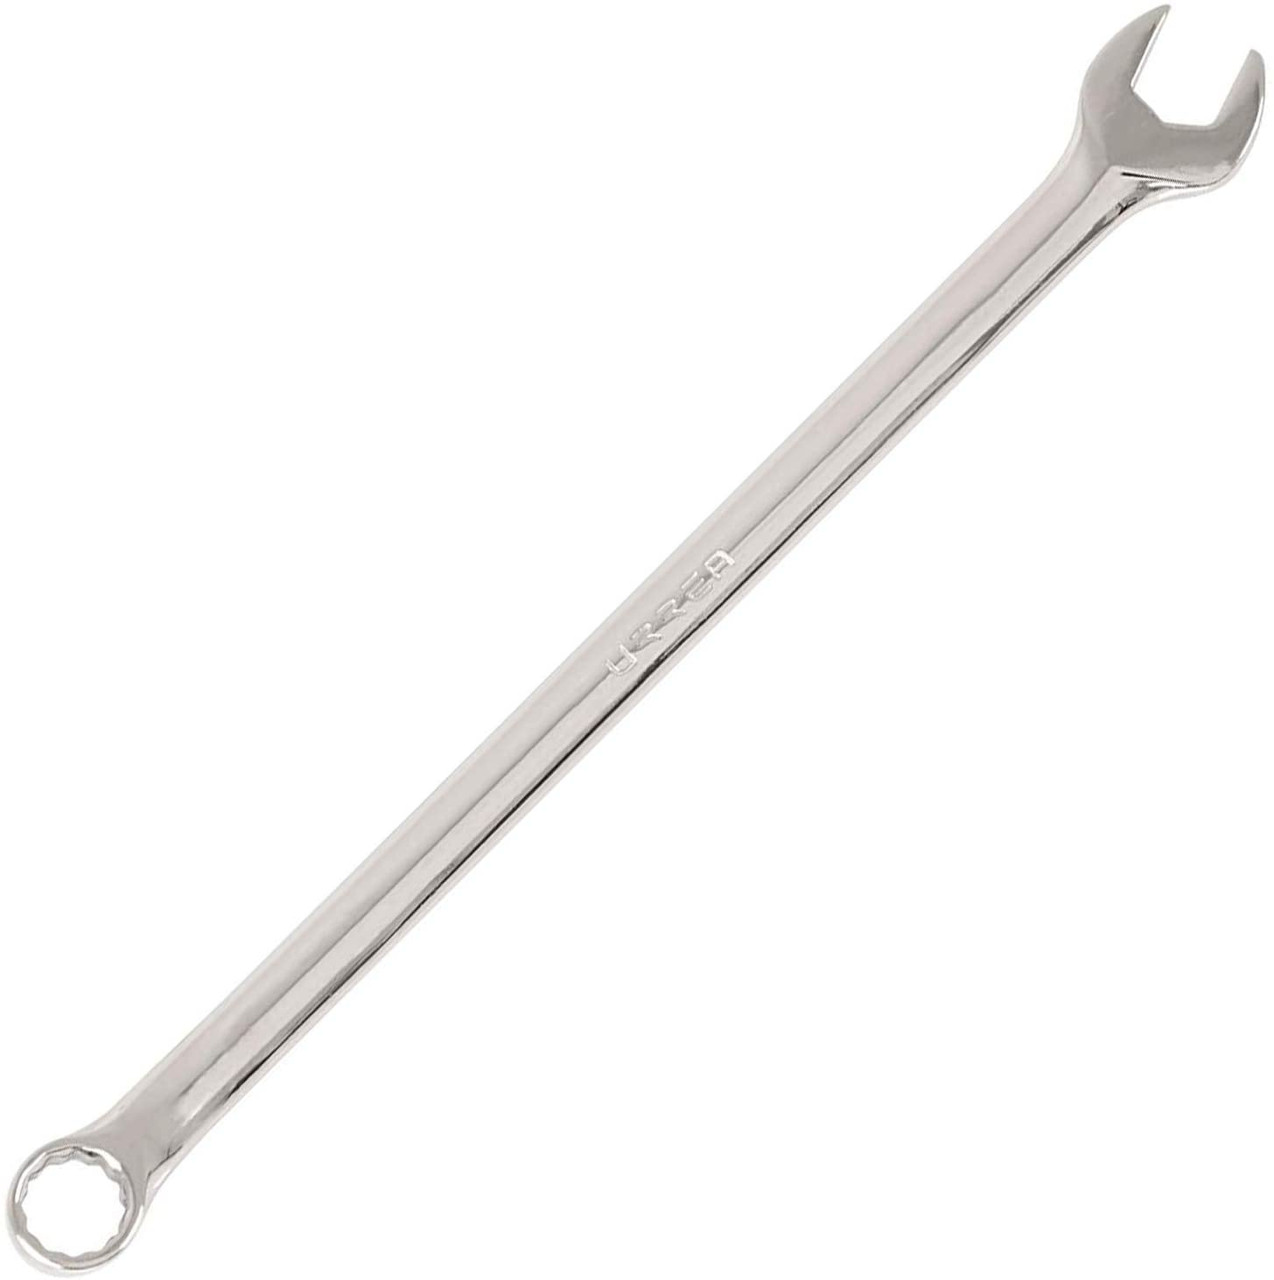 Full polished  Extra Long combination wrench, Size: 1/2, 12 point, Total Length: 8-7/8"